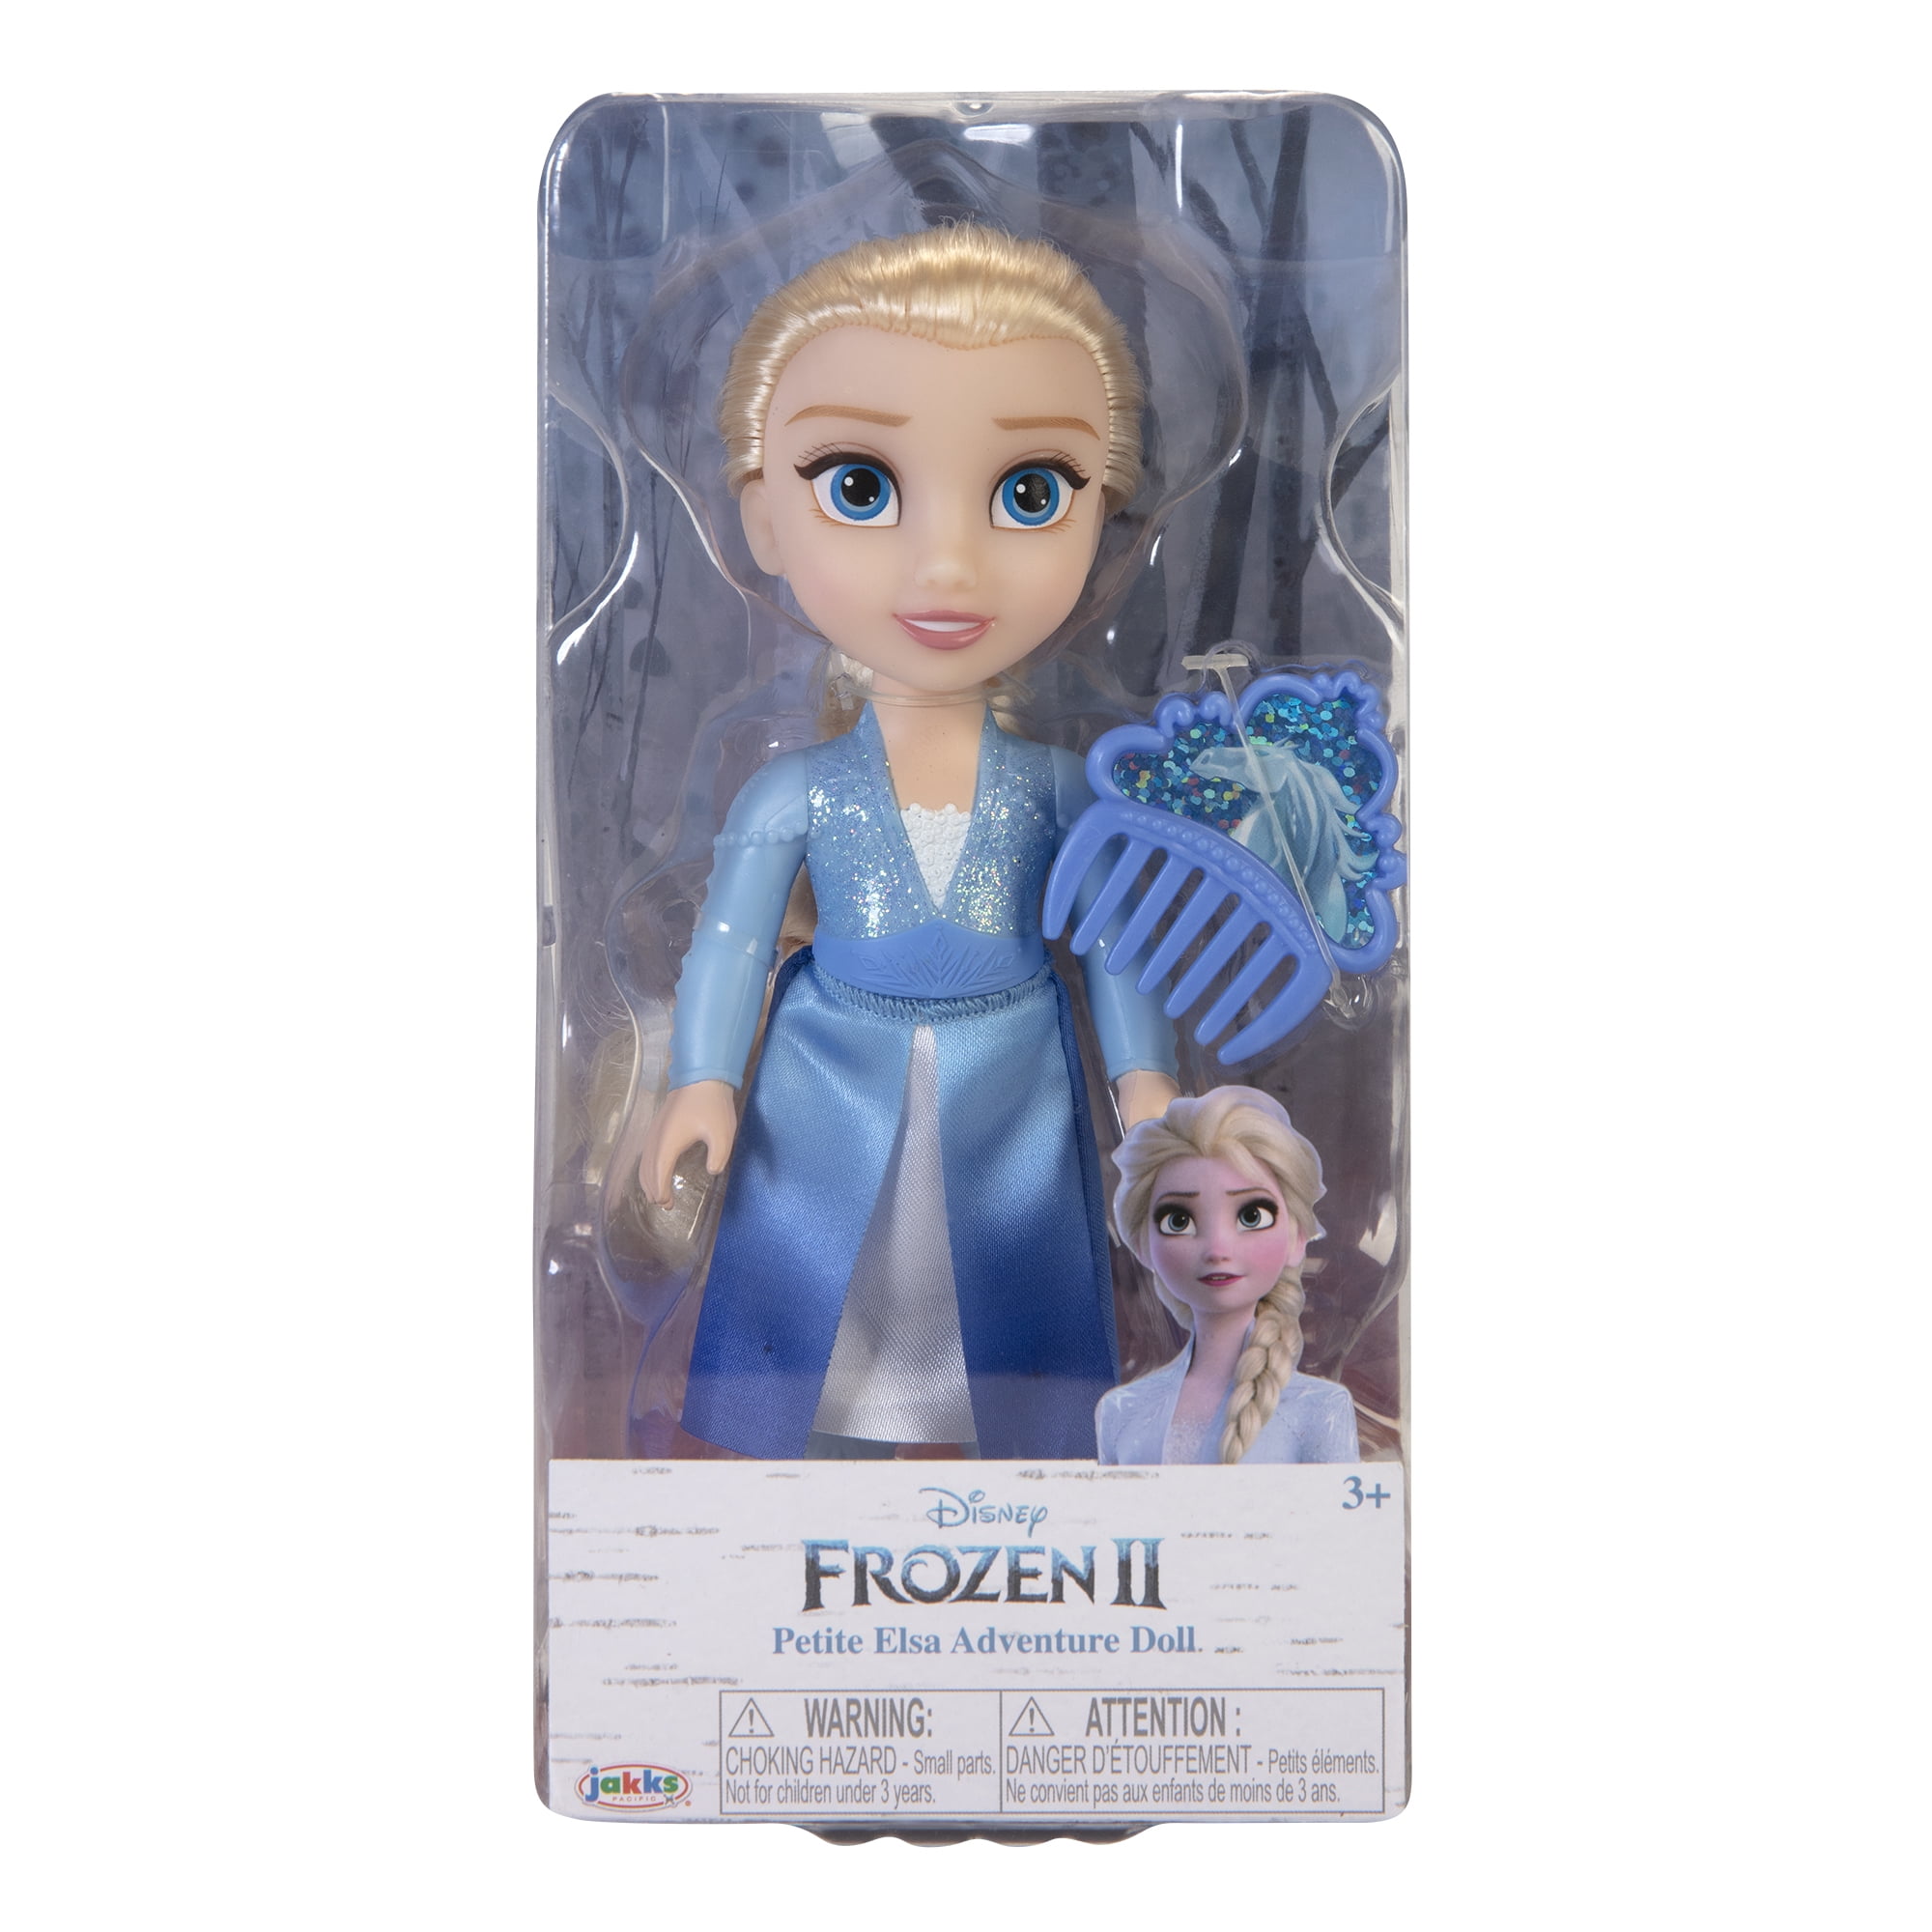 Pair Of Shoes & Comb Gift For Kid's Disney Frozen Petite Elsa Doll With Outfit 